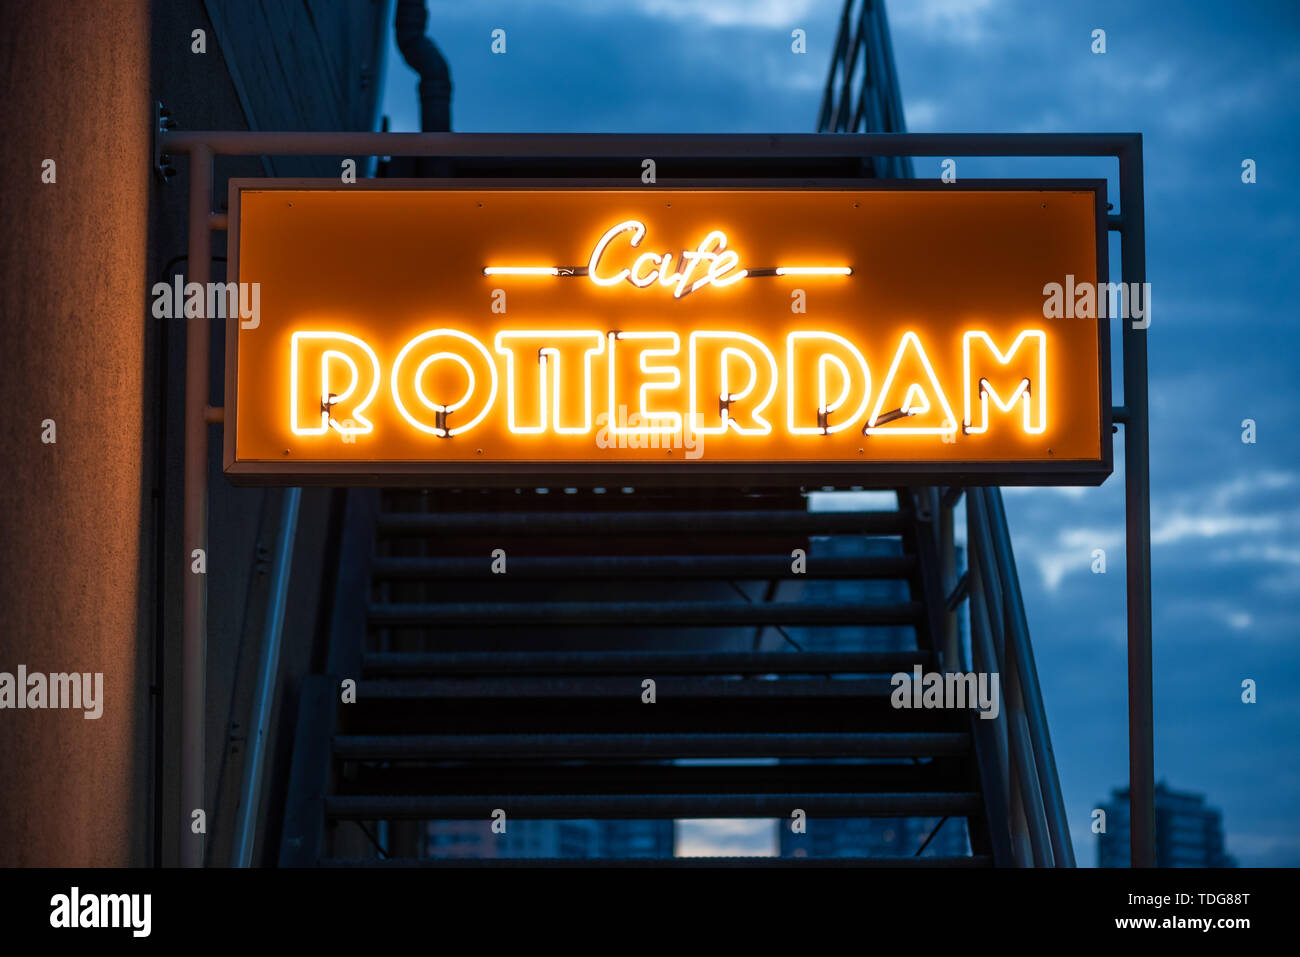 Rotterdam, Netherlands - May 5, 2019 : Cafe Rotterdam neon sign at dusk in the Cruise terminal area Stock Photo